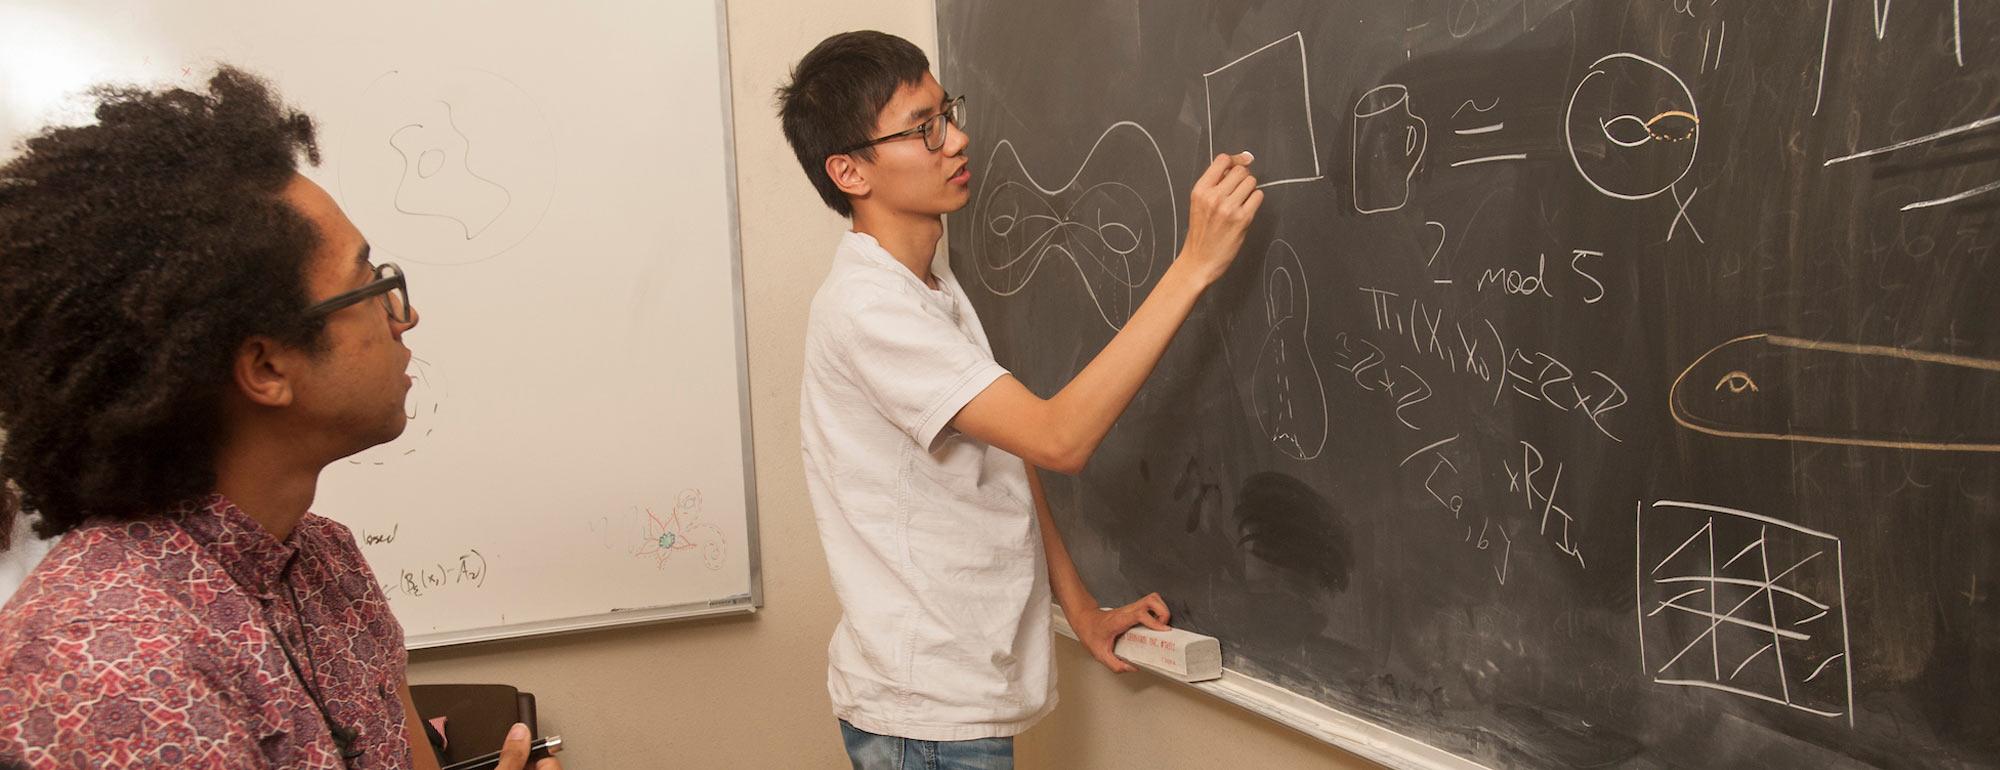 A student solves a complex equation on a blackboard